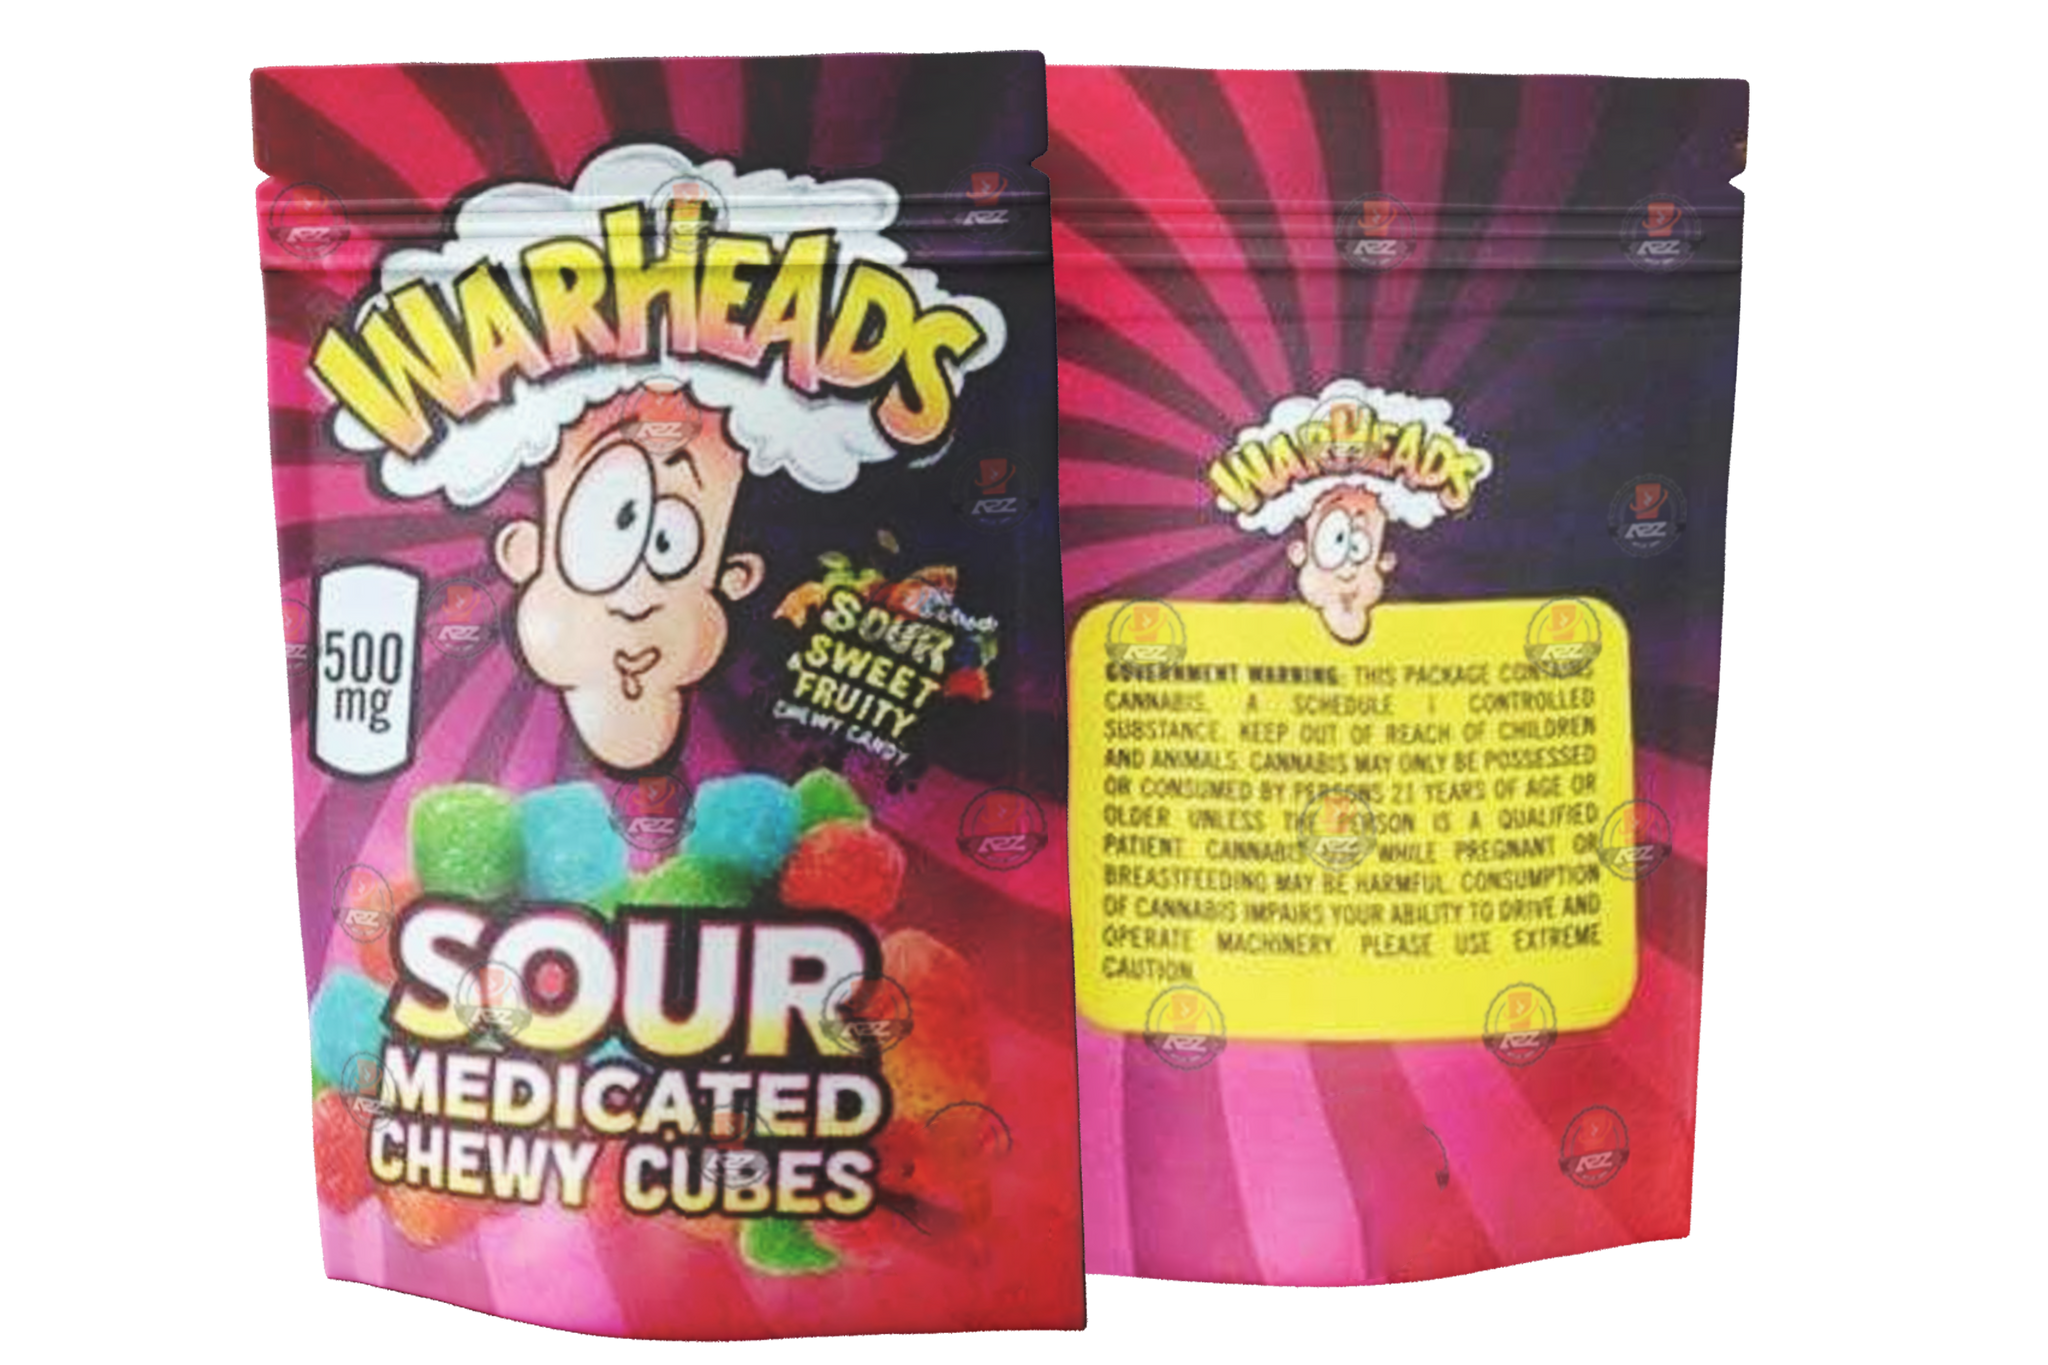 War Heads Sour Sweet Fruity 500mg Mylar bags packaging only